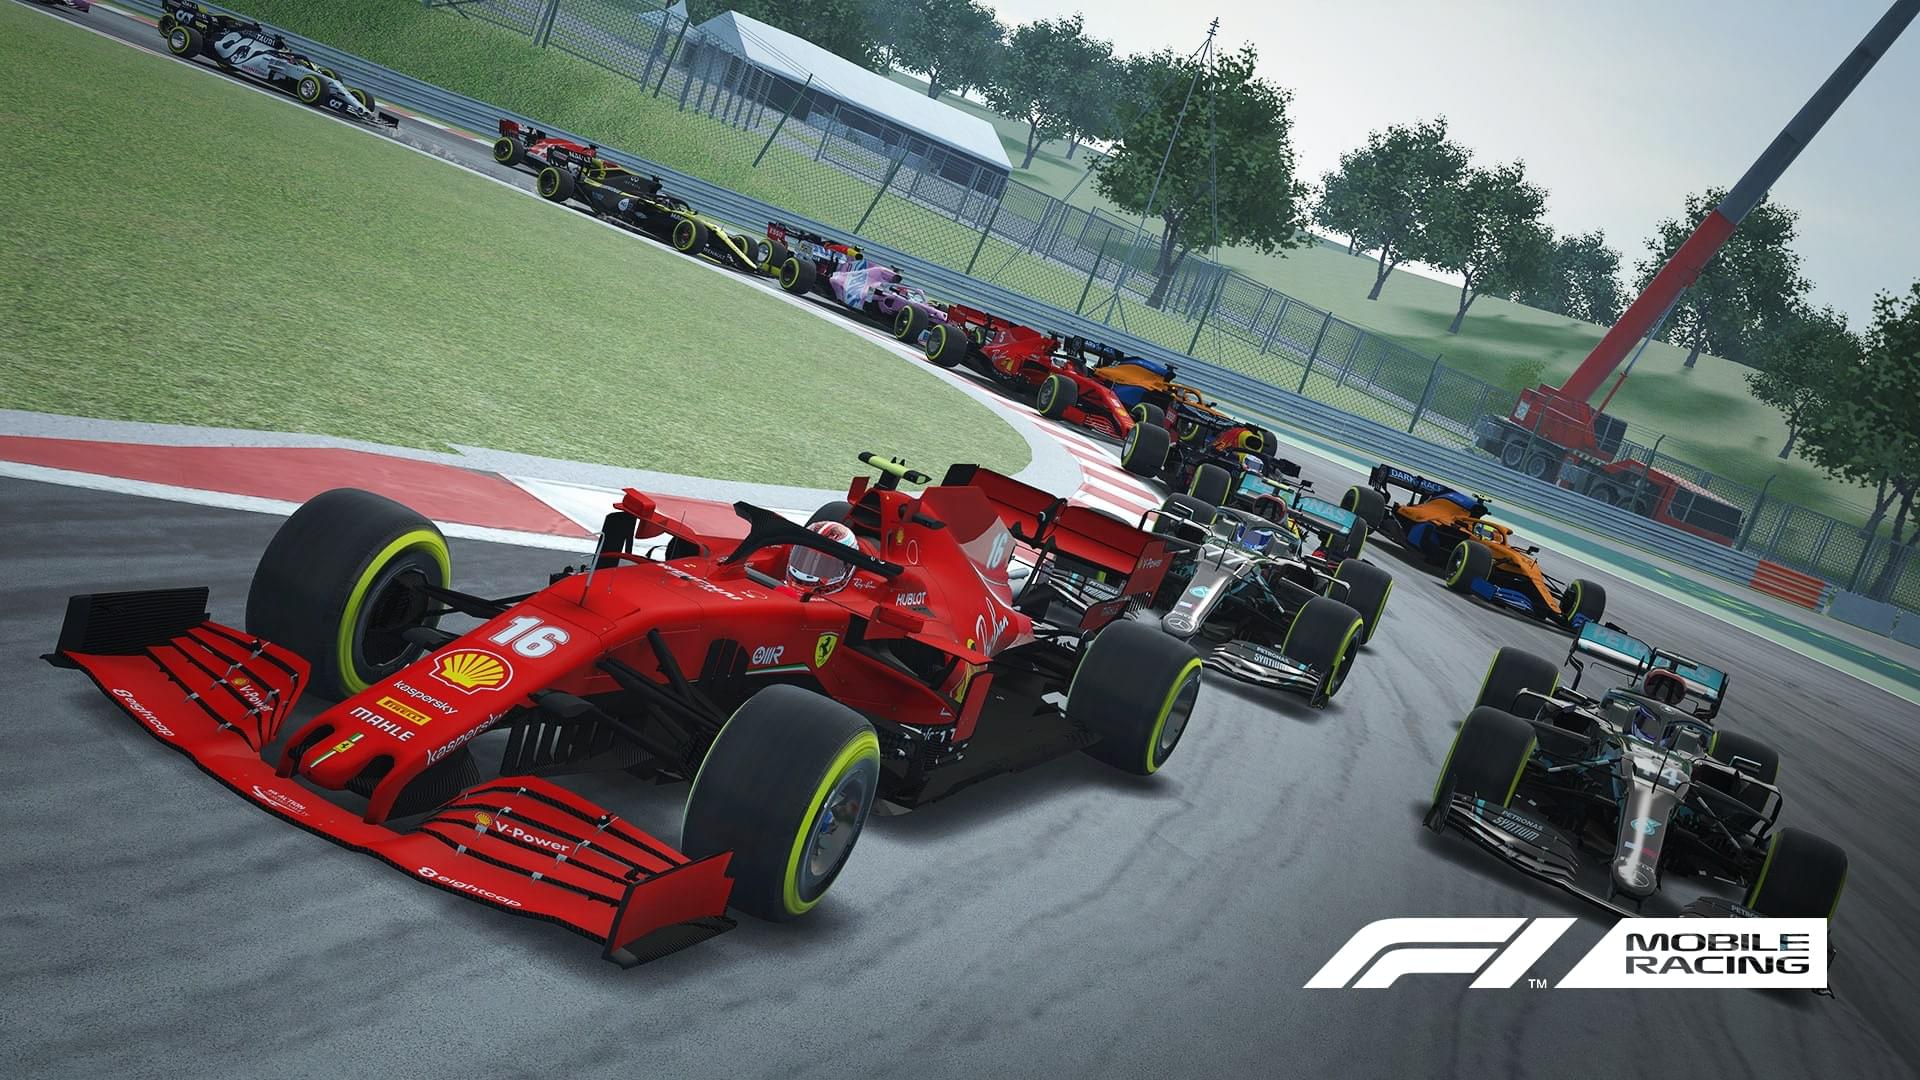 Best F1 games on mobile Can you beat Max Verstappen to the finish?